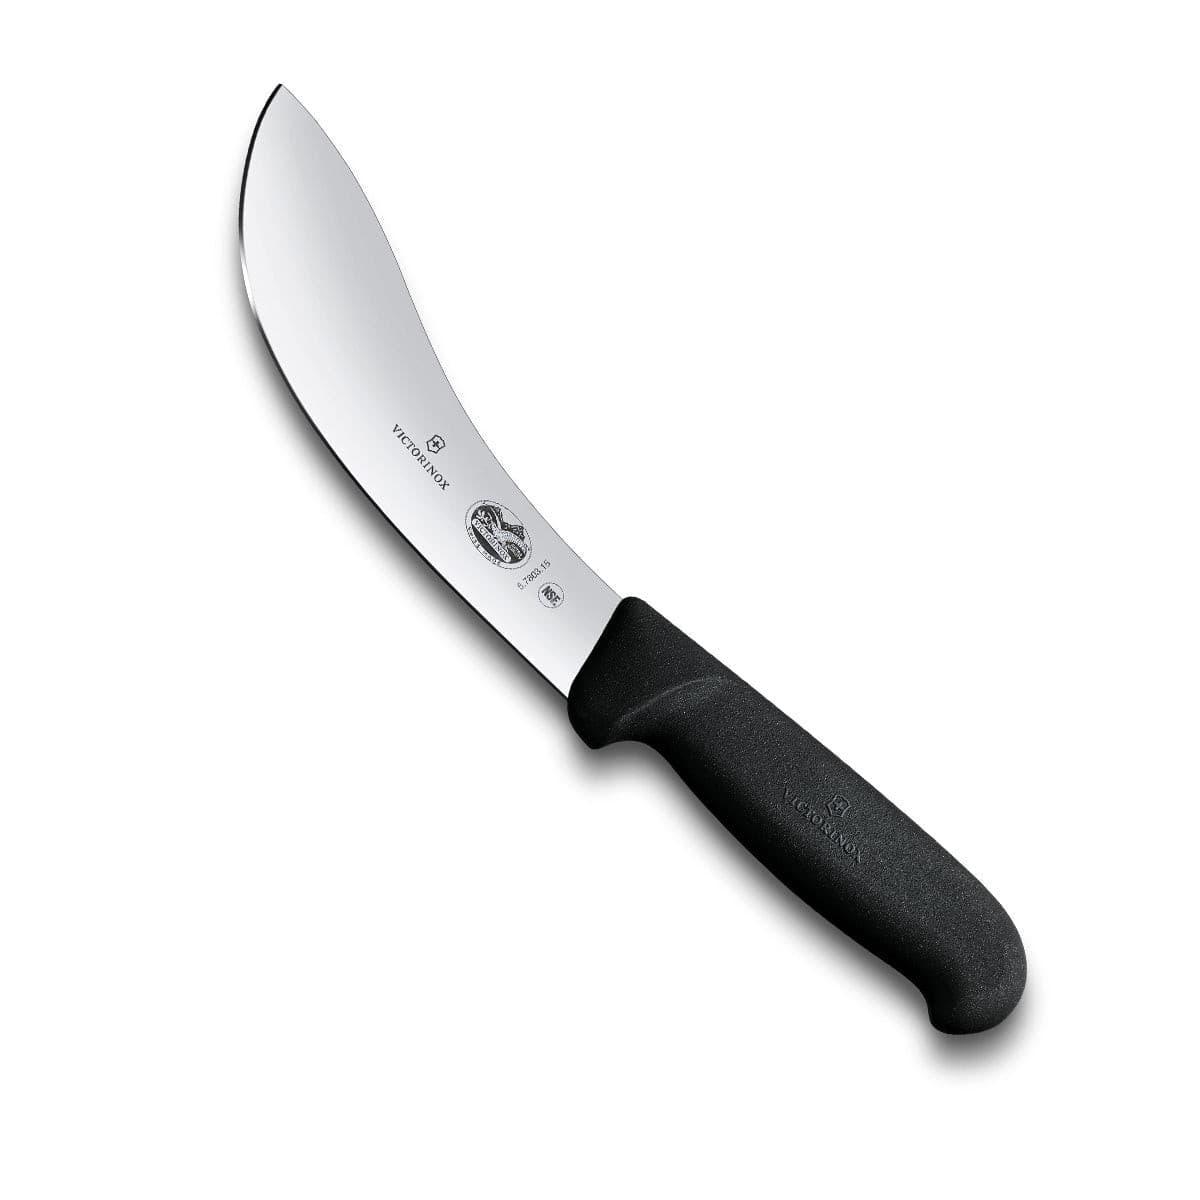 Victorinox 15cm American-Type Skinning Knife with Fibrox Handle - Knife Store